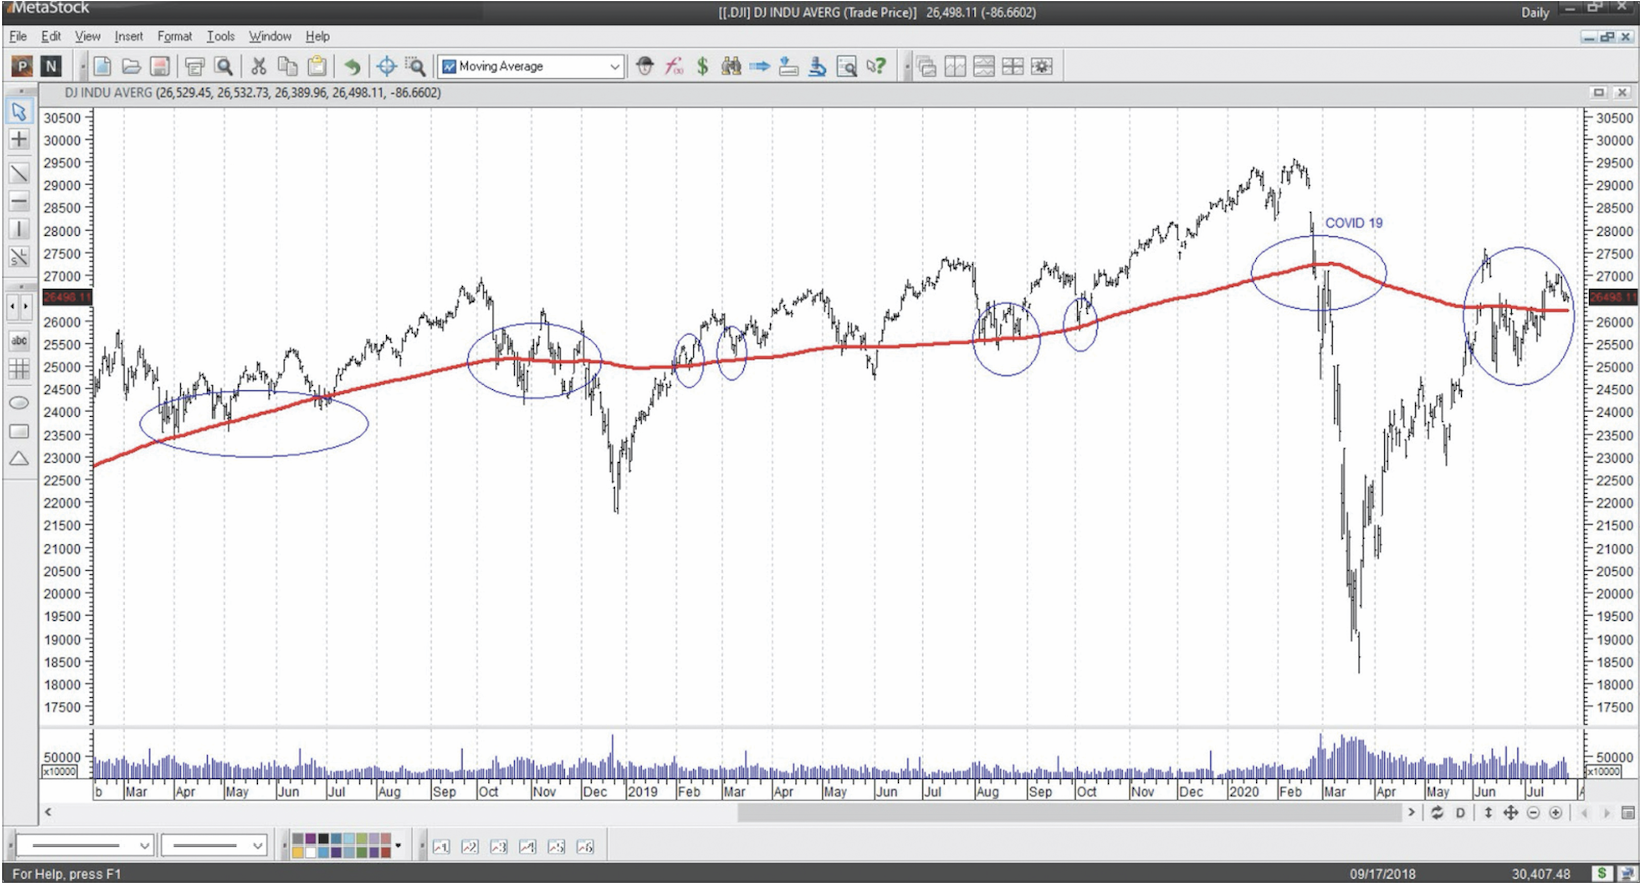 Technical Analysis in a COVID-19 Market